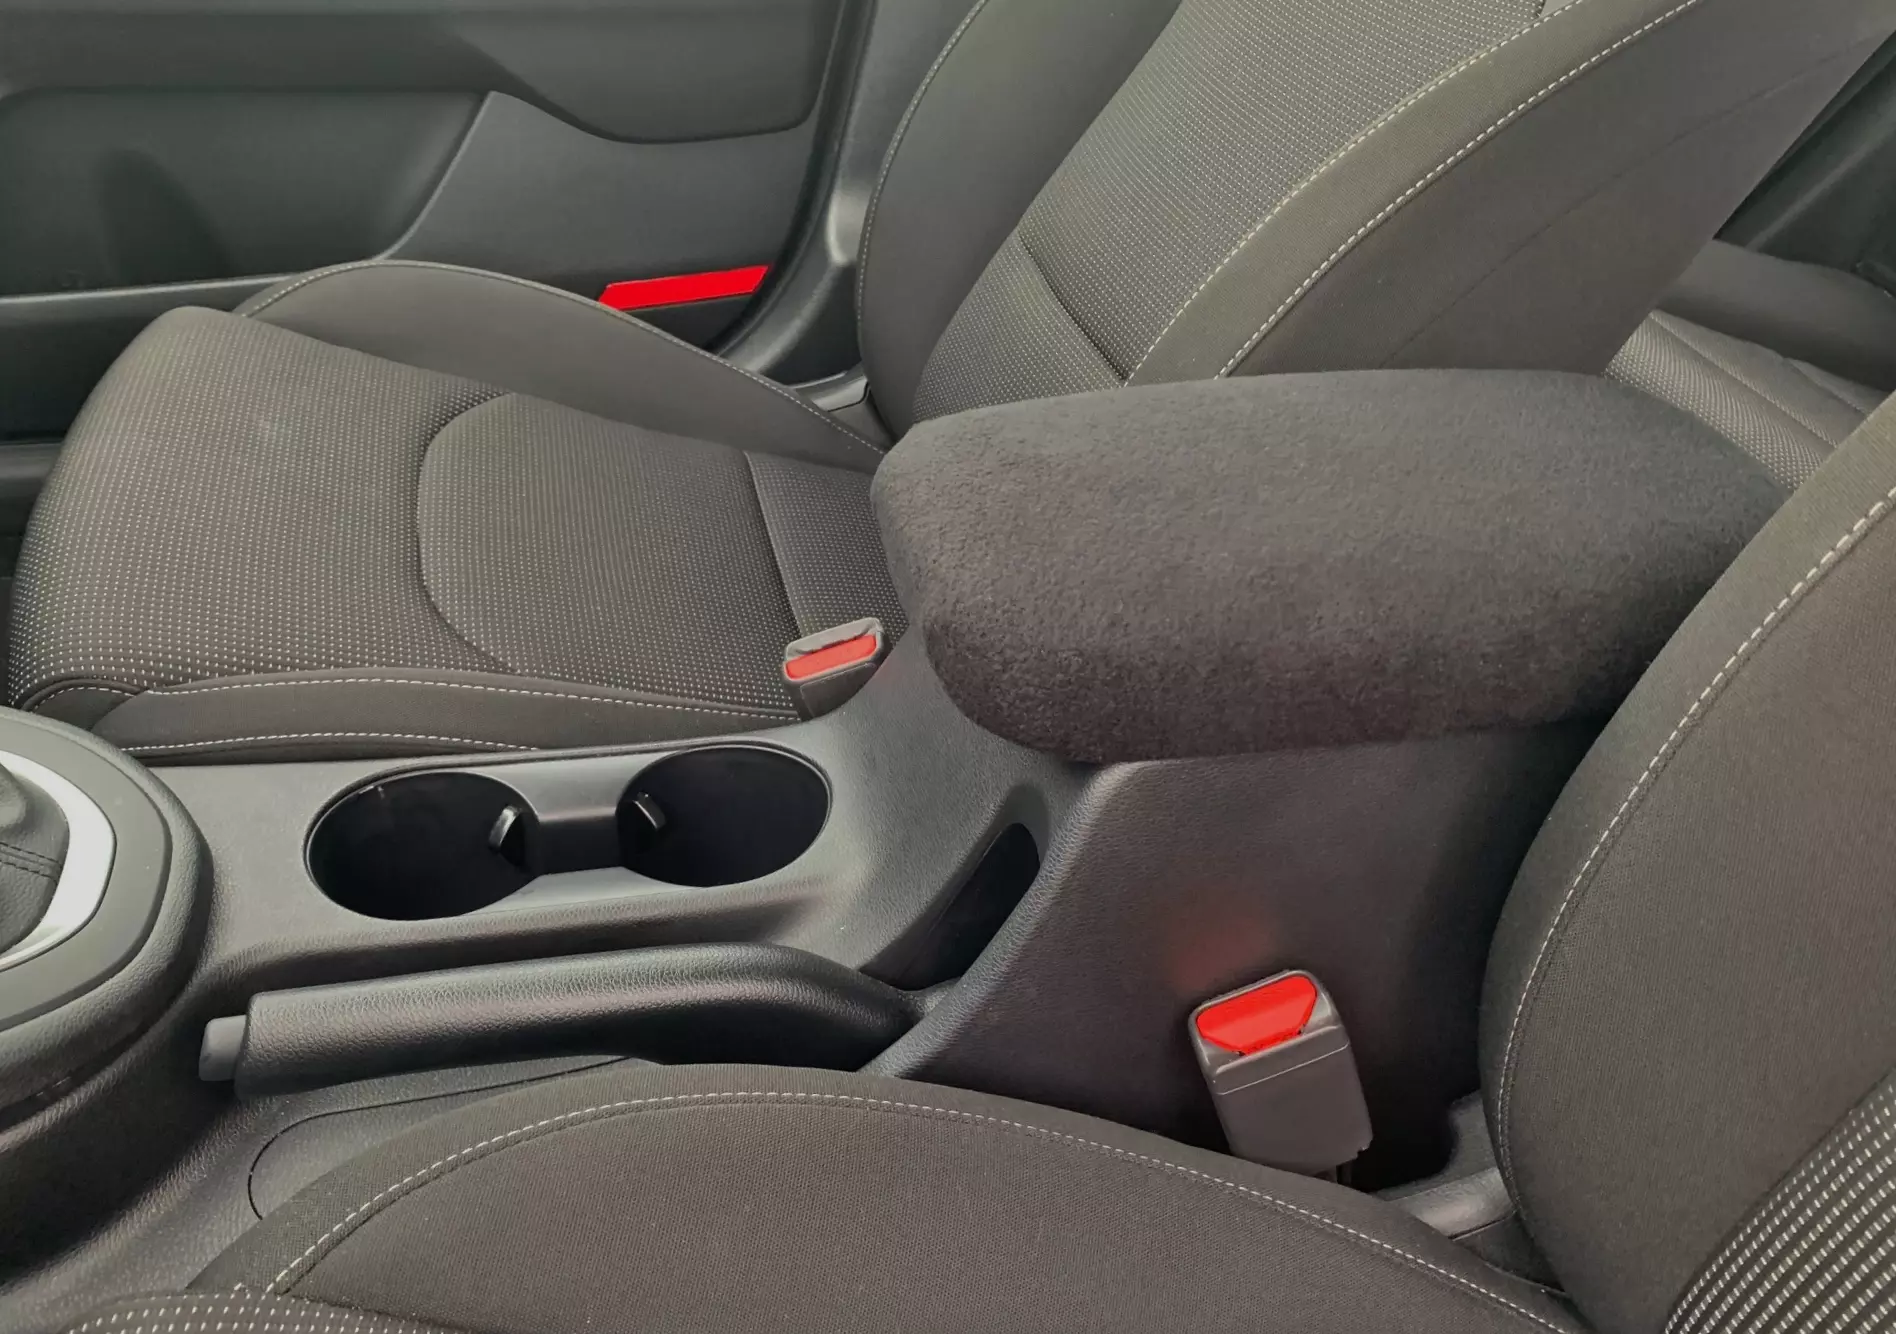 Buy Center Console Armrest Cover fits the Kia Forte 2015-2022- Fleece Material